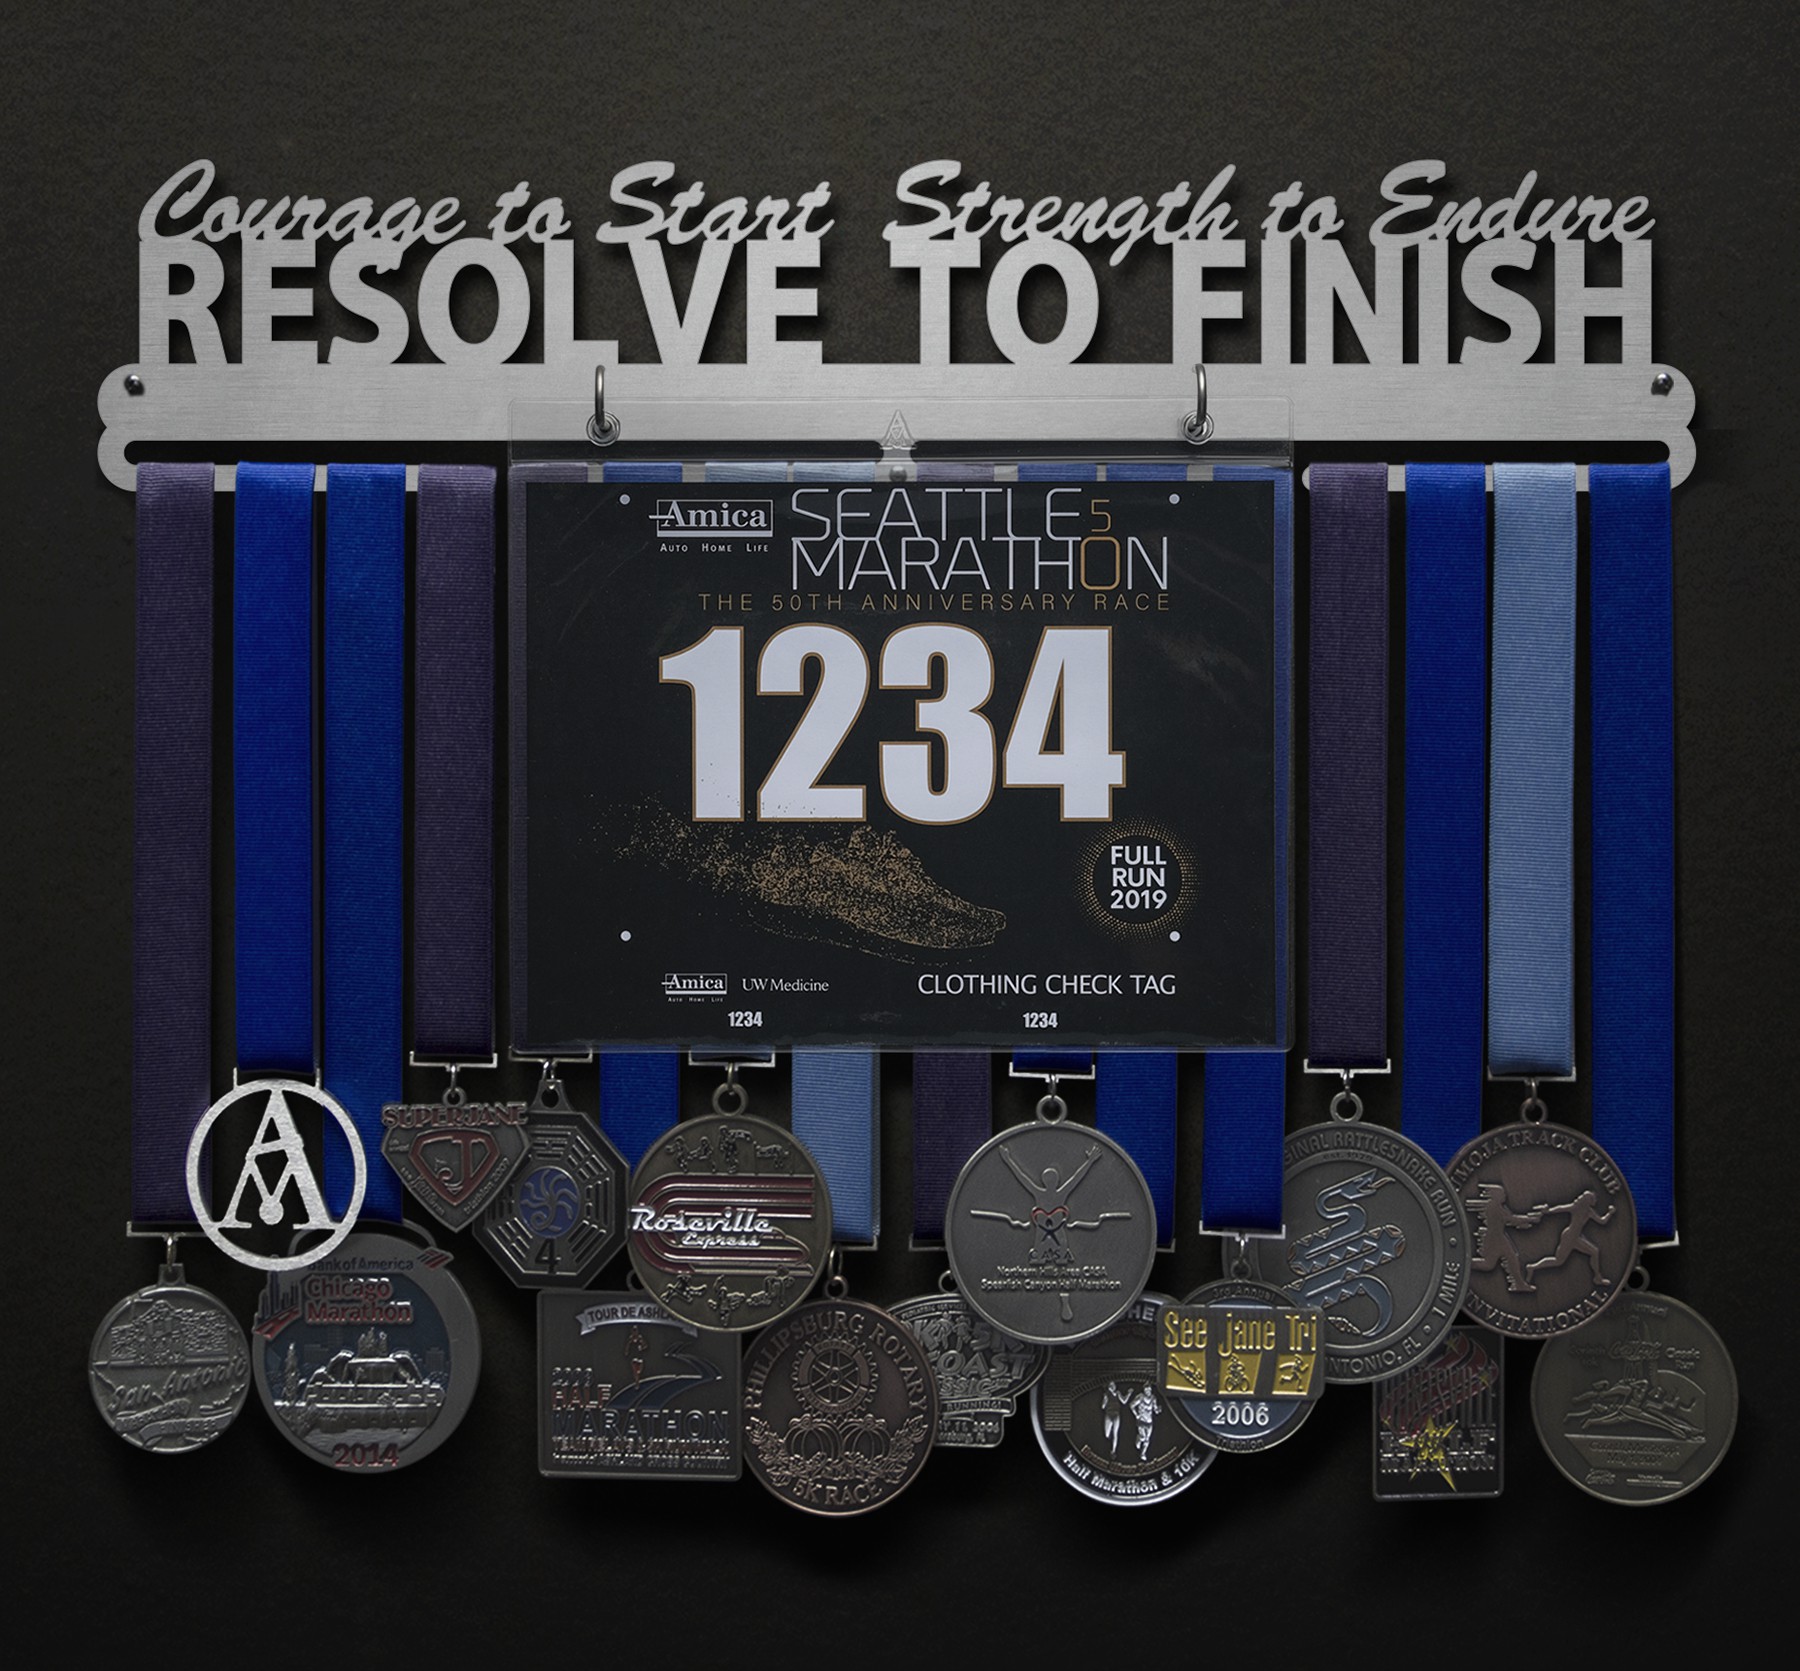 Courage To Start, Strength To Endure, Resolve To Finish Bib and Medal Display